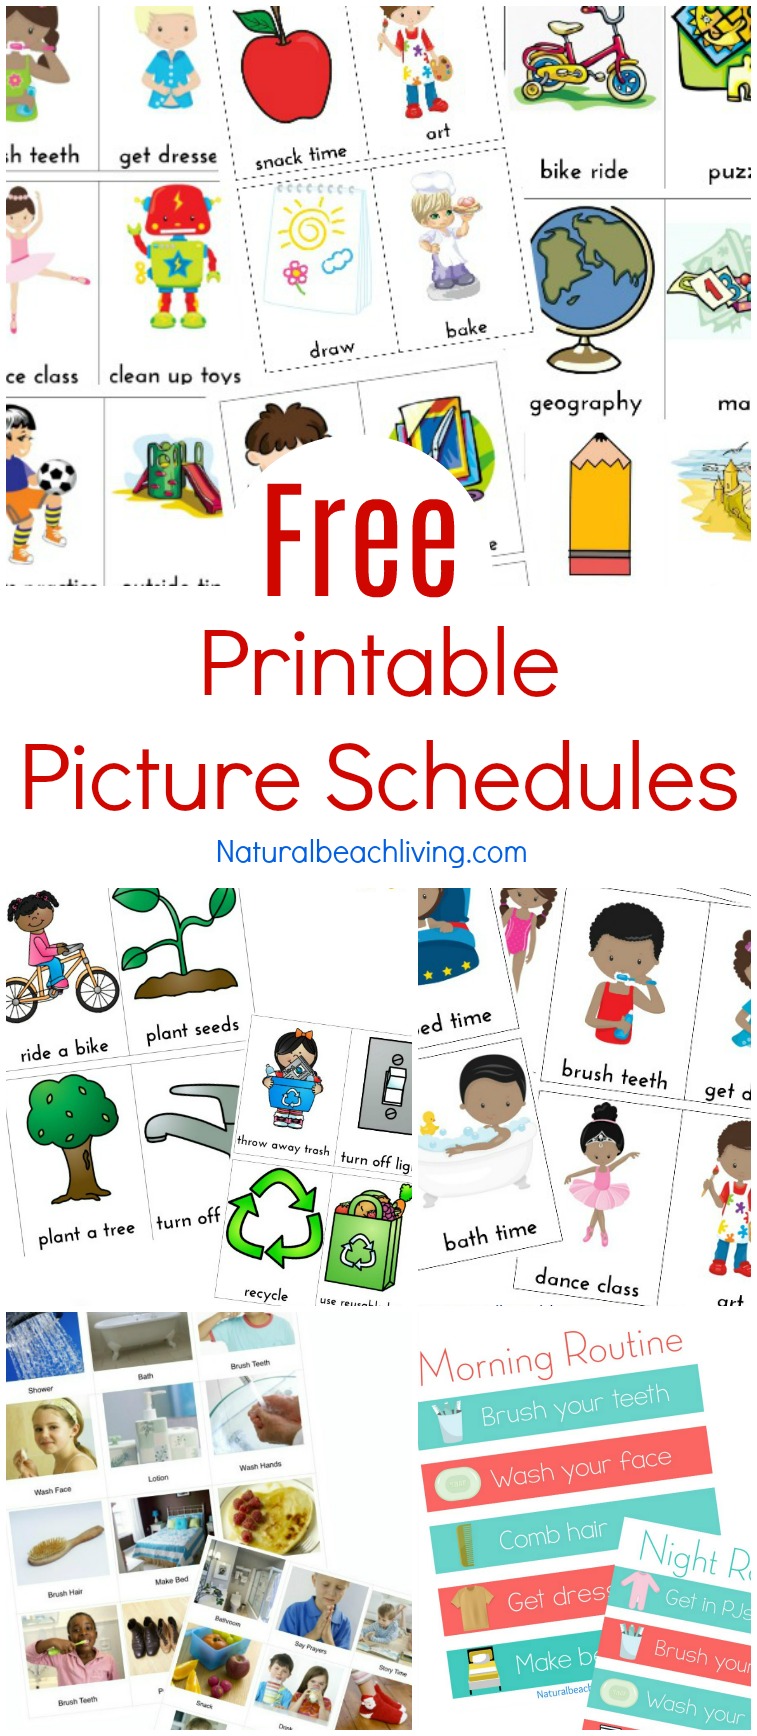 Free Printable Picture Schedule Cards Visual Schedule Printables Natural Beach Living